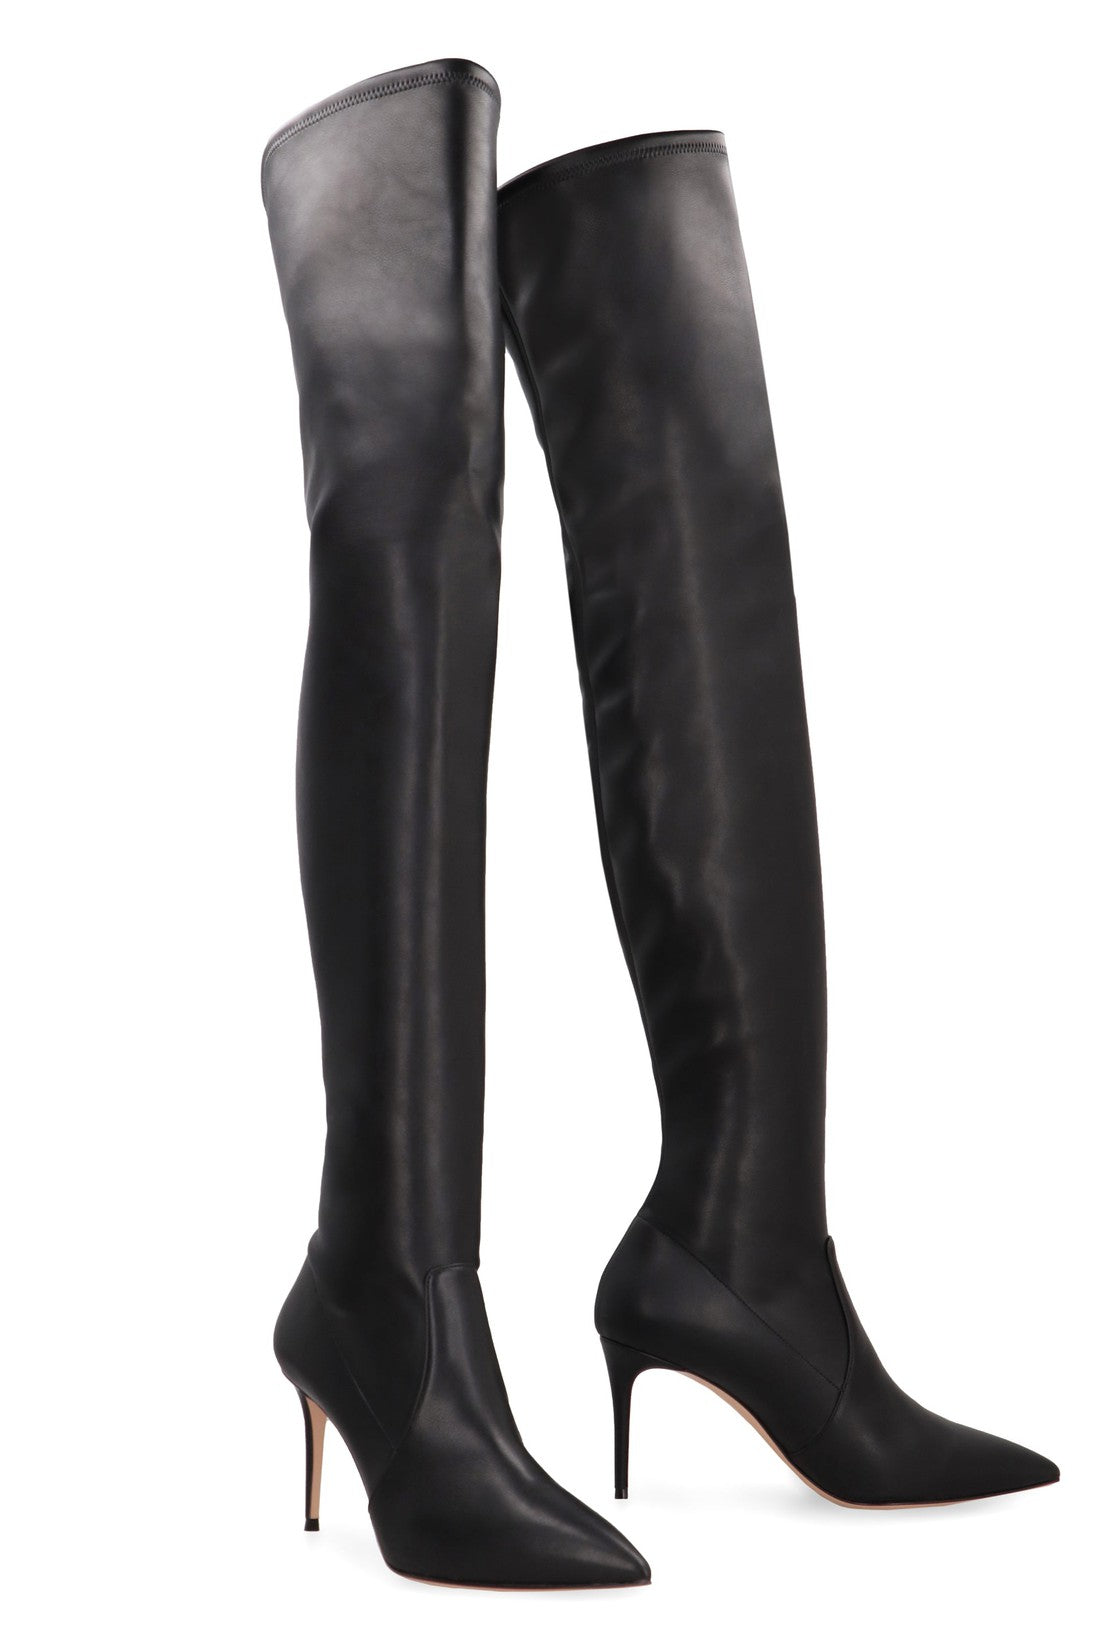 Casadei-OUTLET-SALE-Julia over-the-knee boots-ARCHIVIST